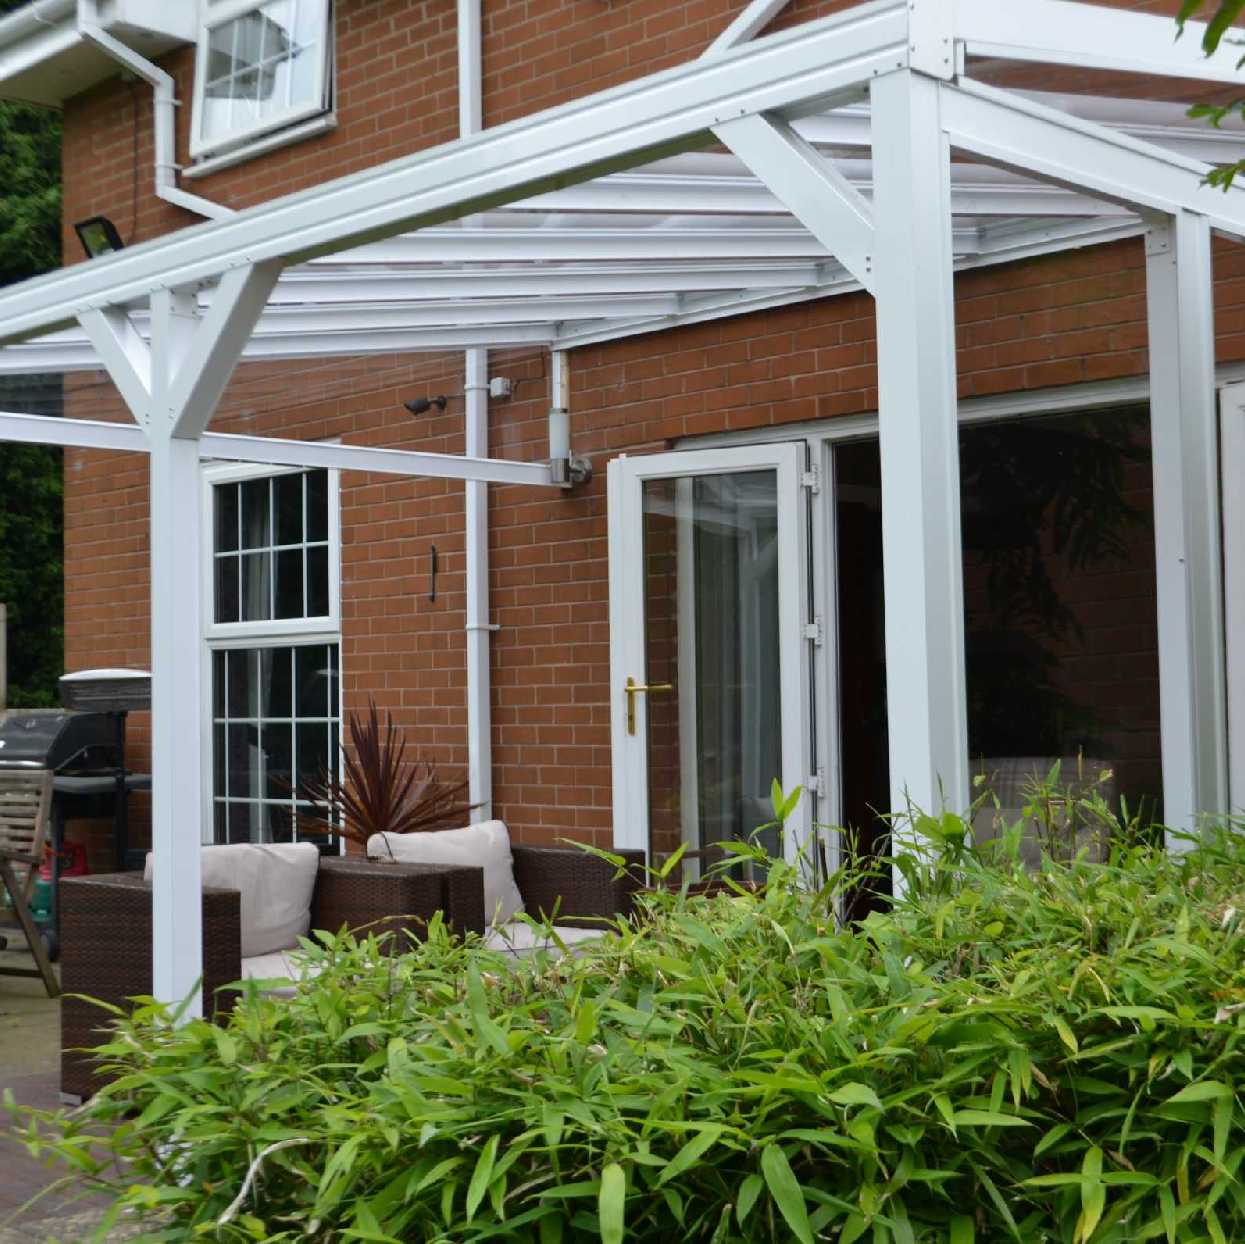 Omega Smart Lean-To Canopy, White with 6mm Glass Clear Plate Polycarbonate Glazing - 4.2m (W) x 4.0m (P), (3) Supporting Posts from Omega Build